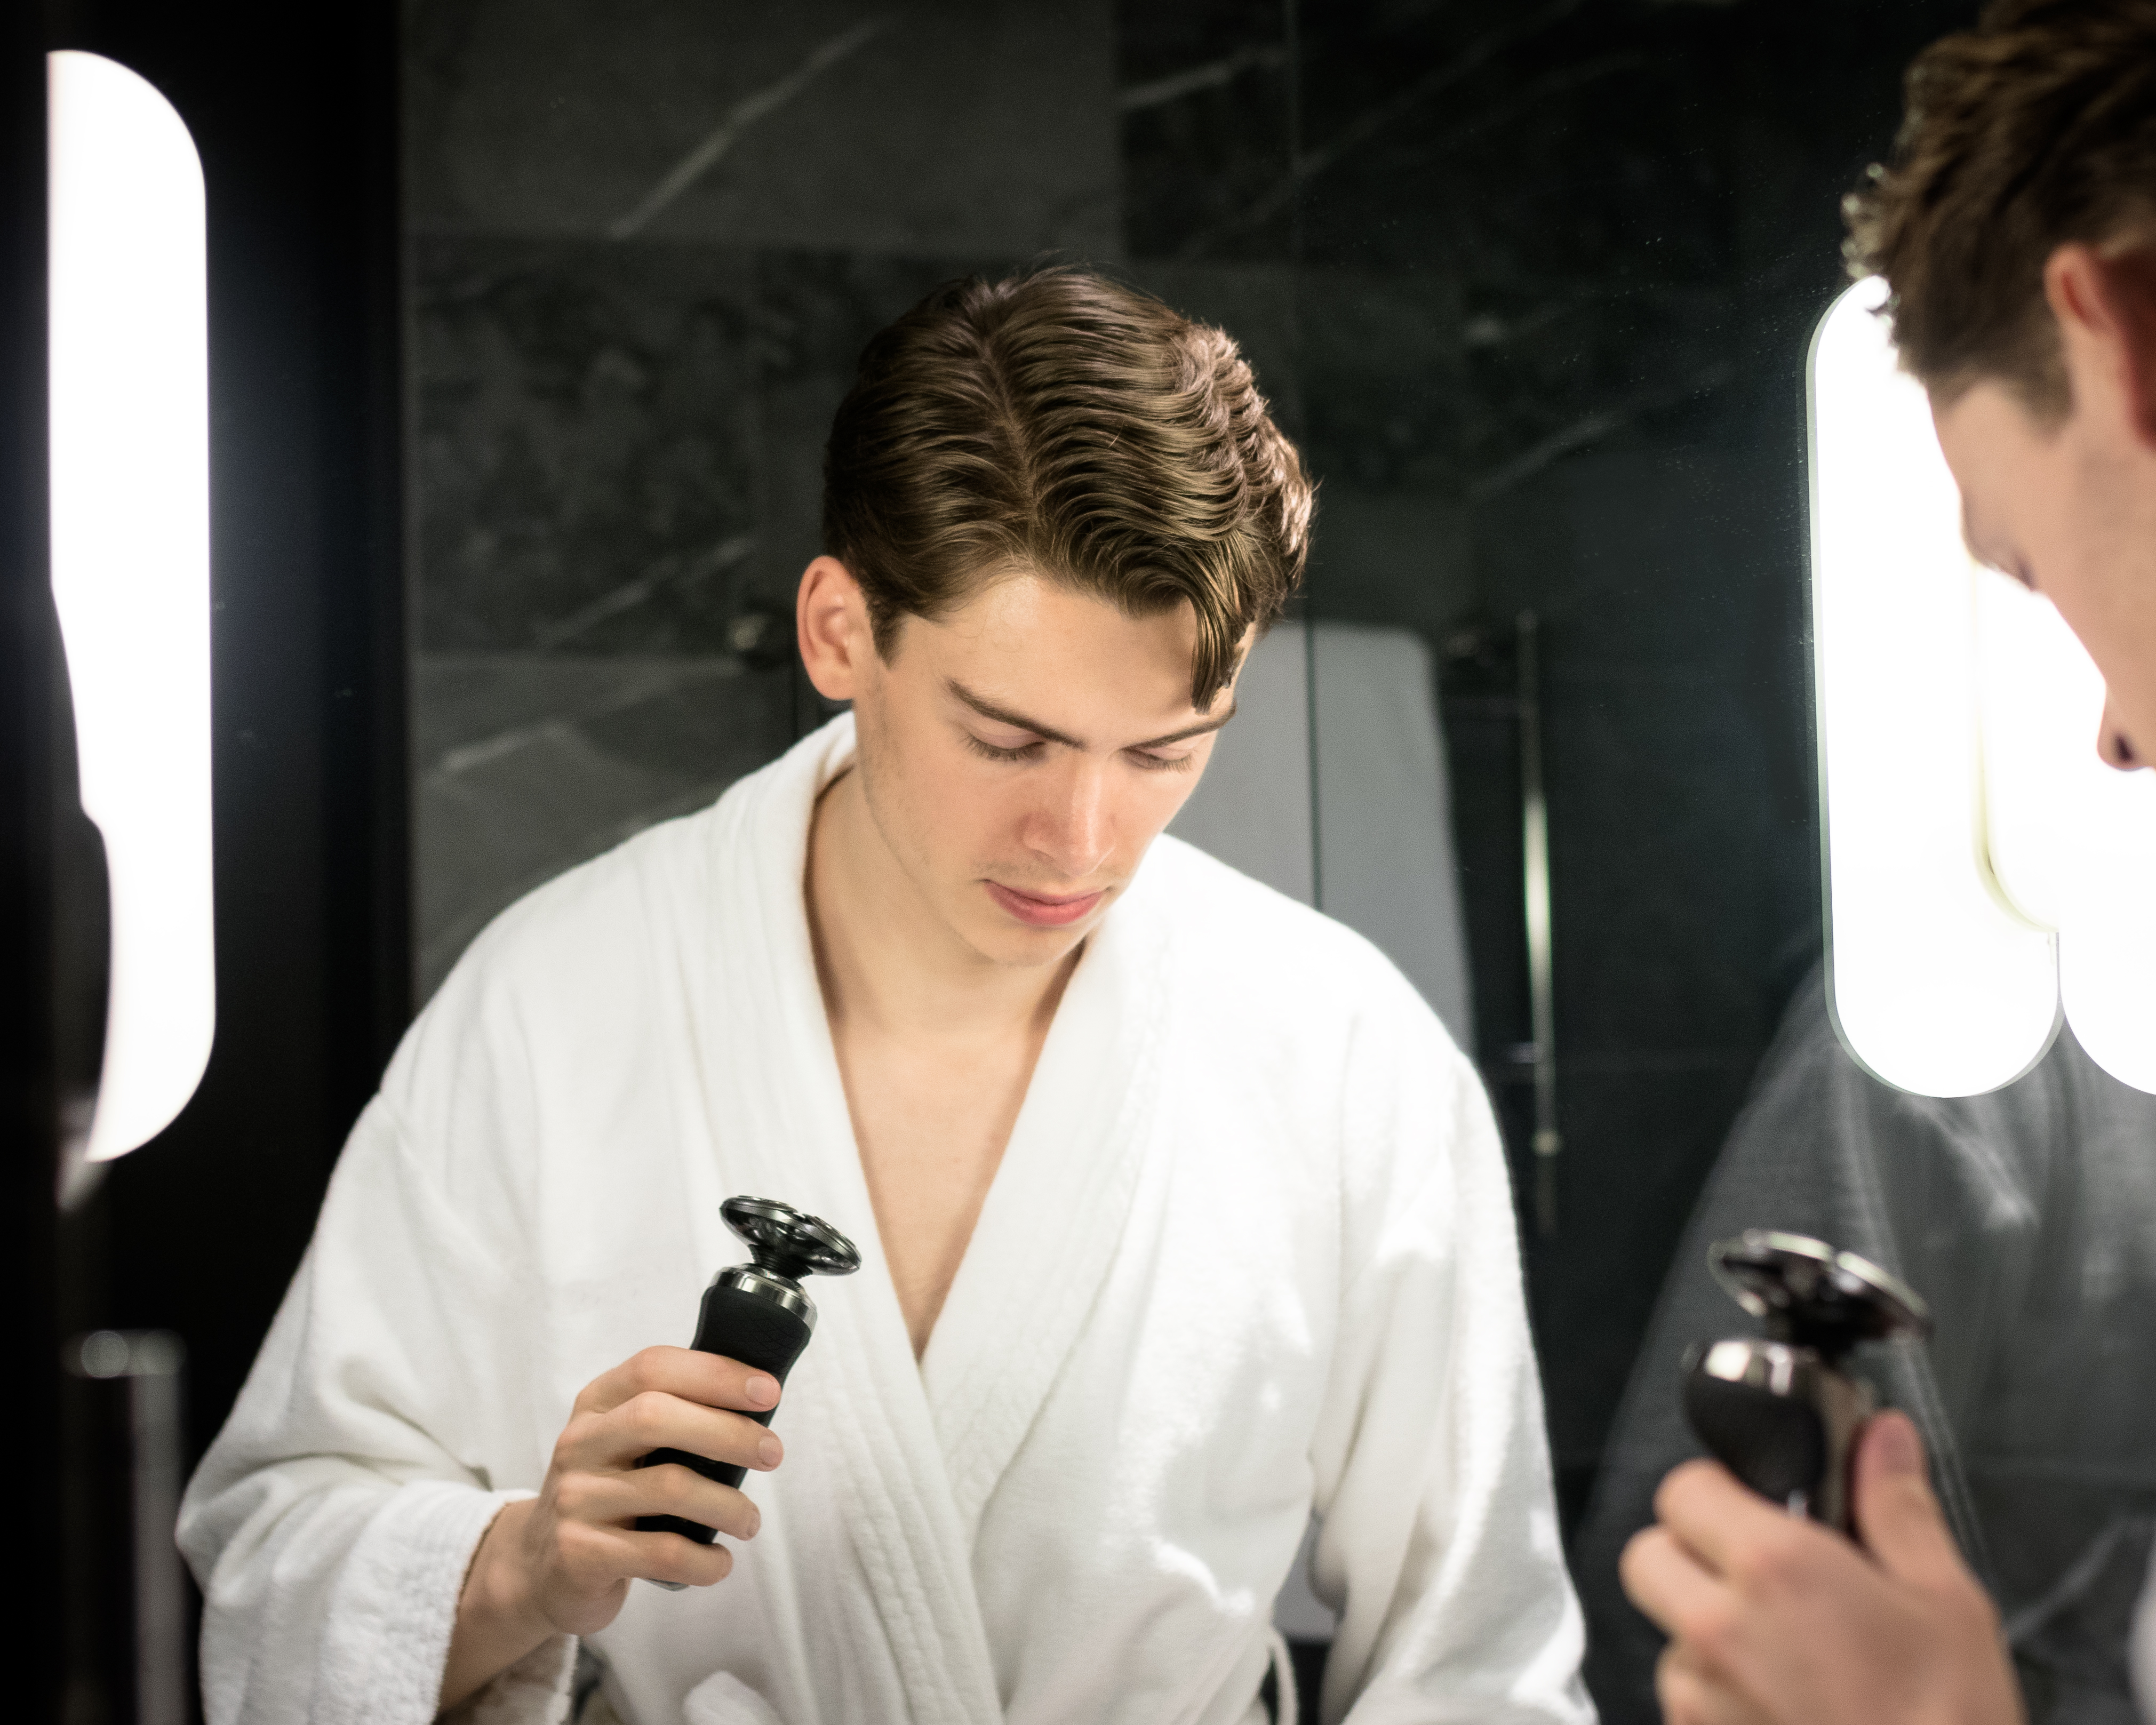 The 4 Grooming Habits Every Gentleman Should Master – For Tidy Facial Hair